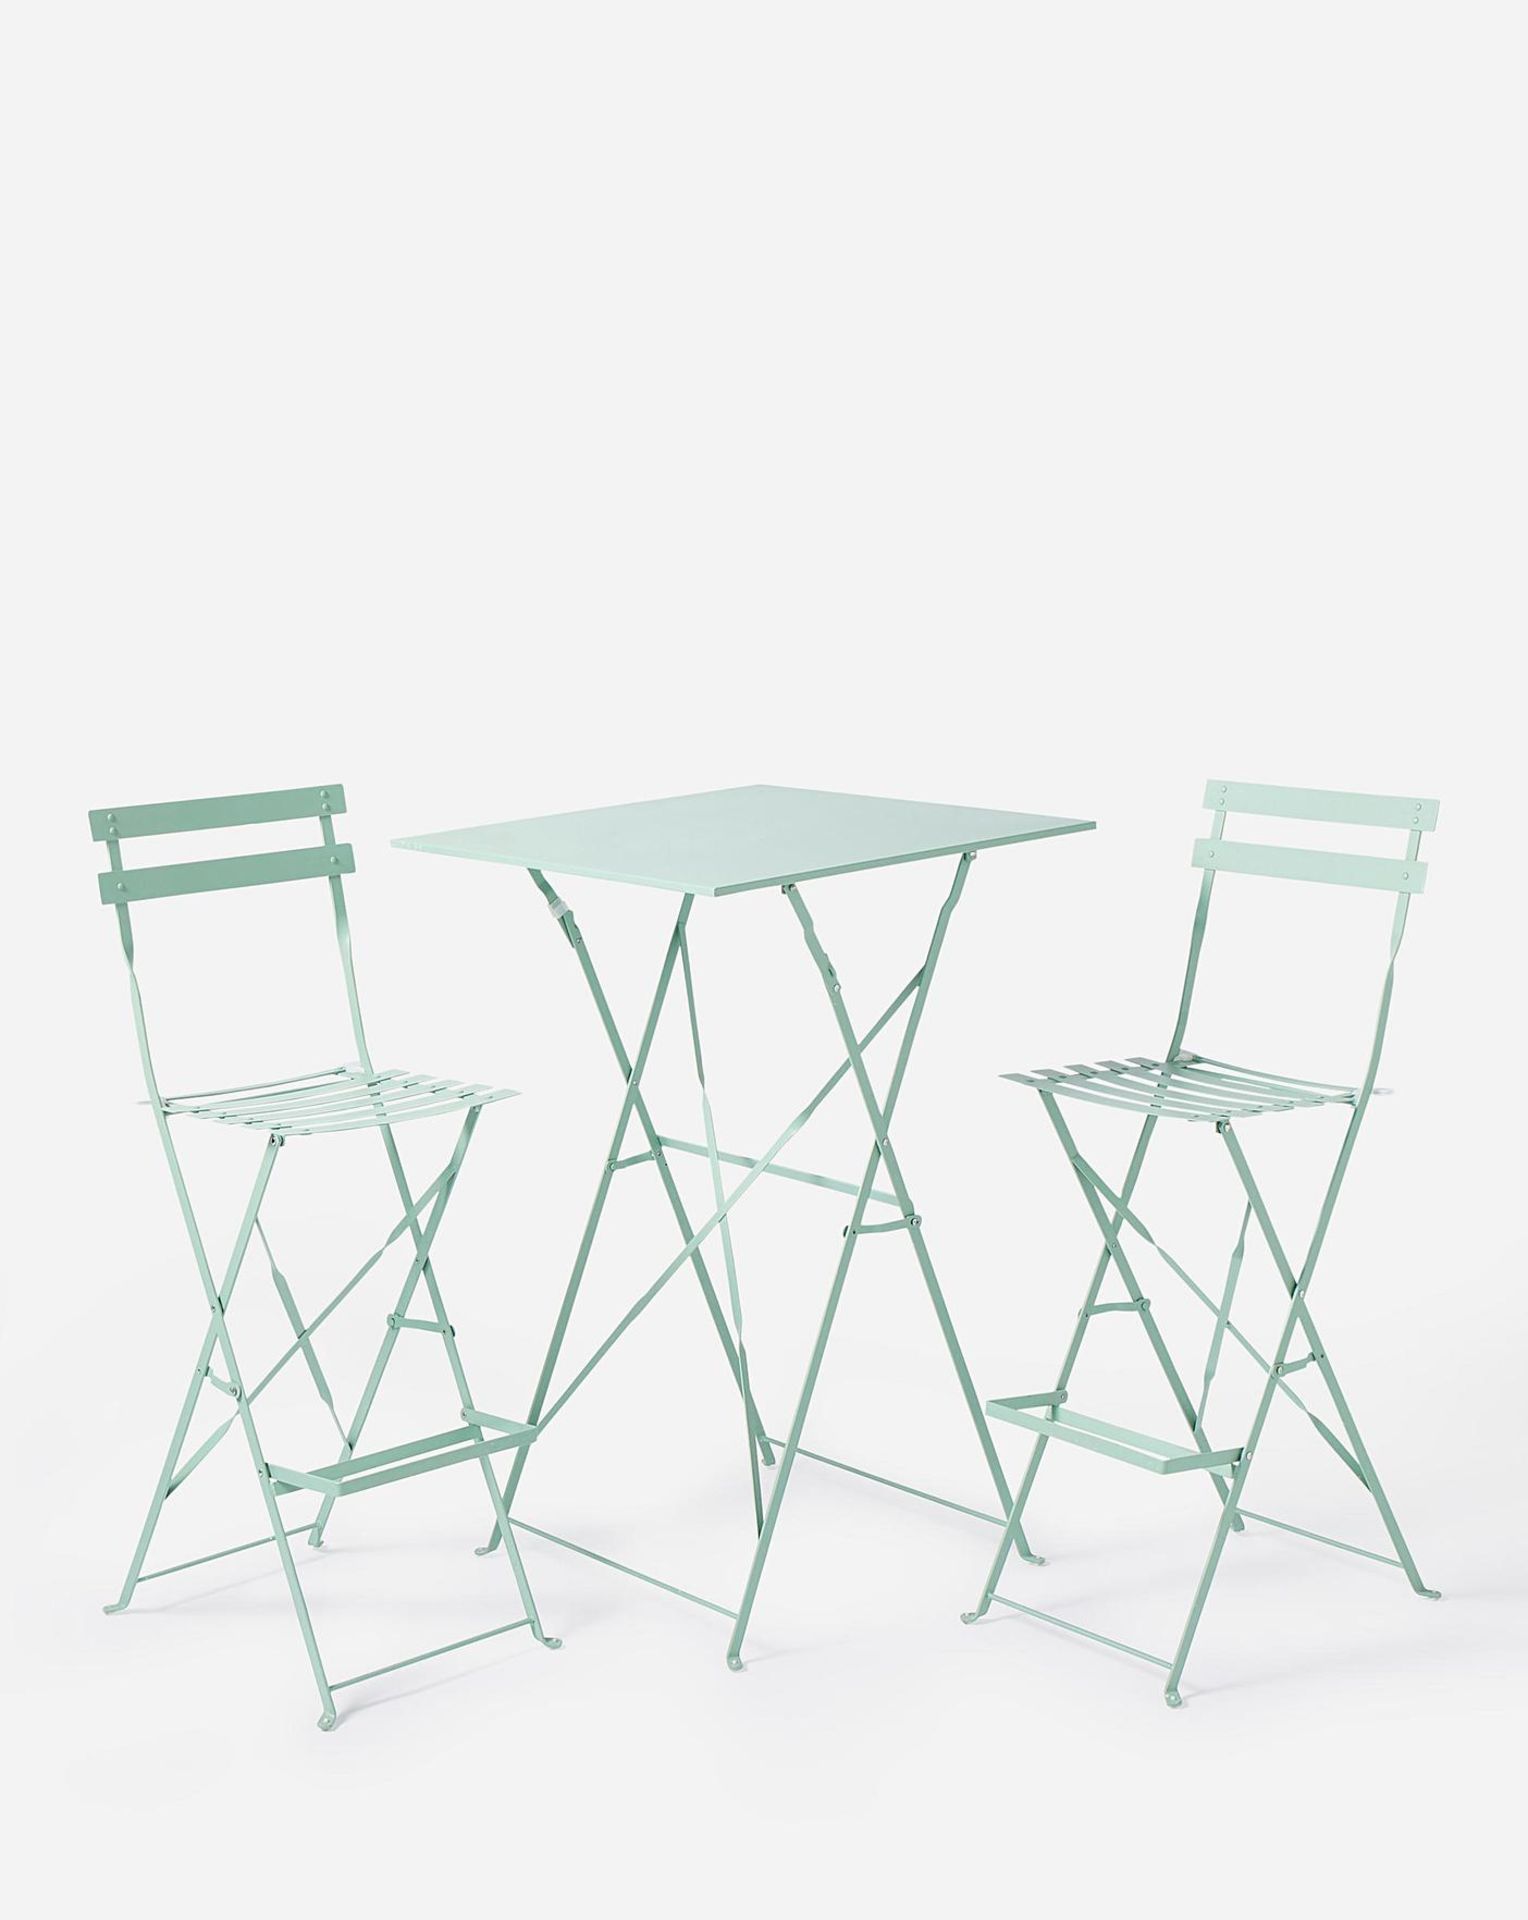 TRADE PALLET TO CONTAIN 6x BRAND NEW Palma Bistro Bar Set GREEN. RRP £159 EACH - Image 2 of 3